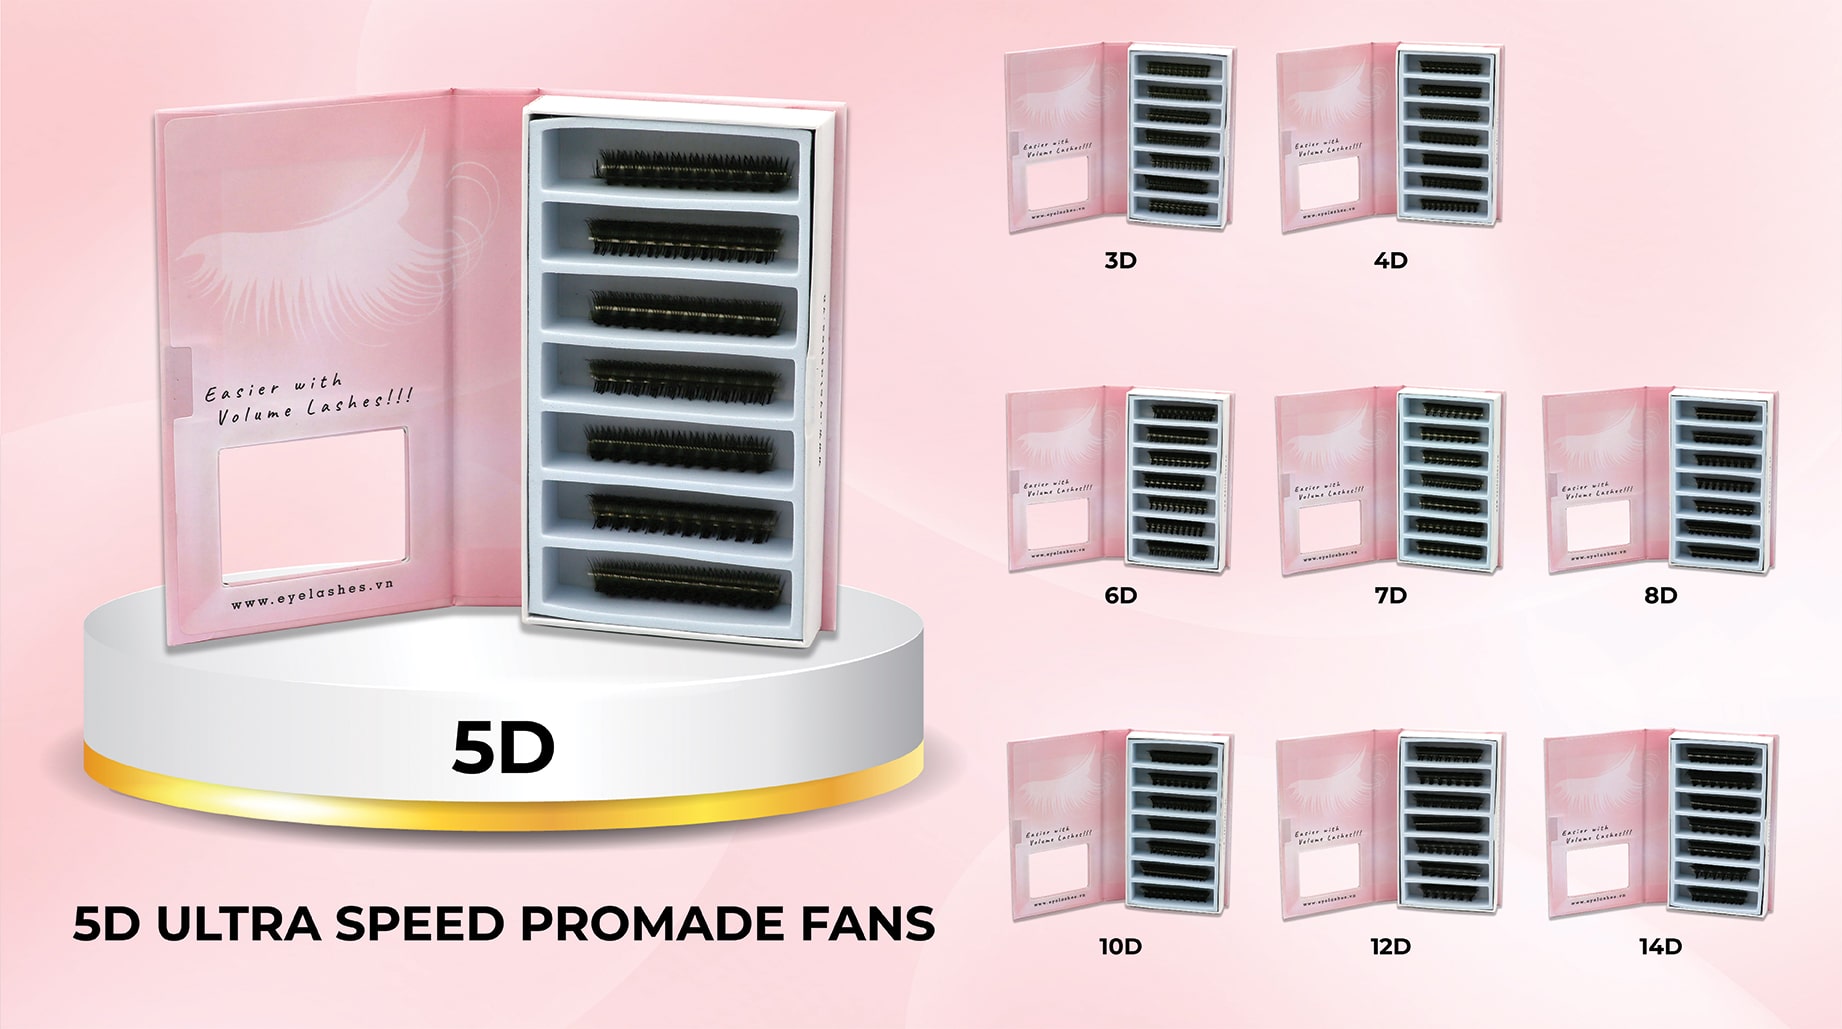 Ultra-Speed-5D-promade-fan-wholesale-eyelash-supplier-VNLASHES